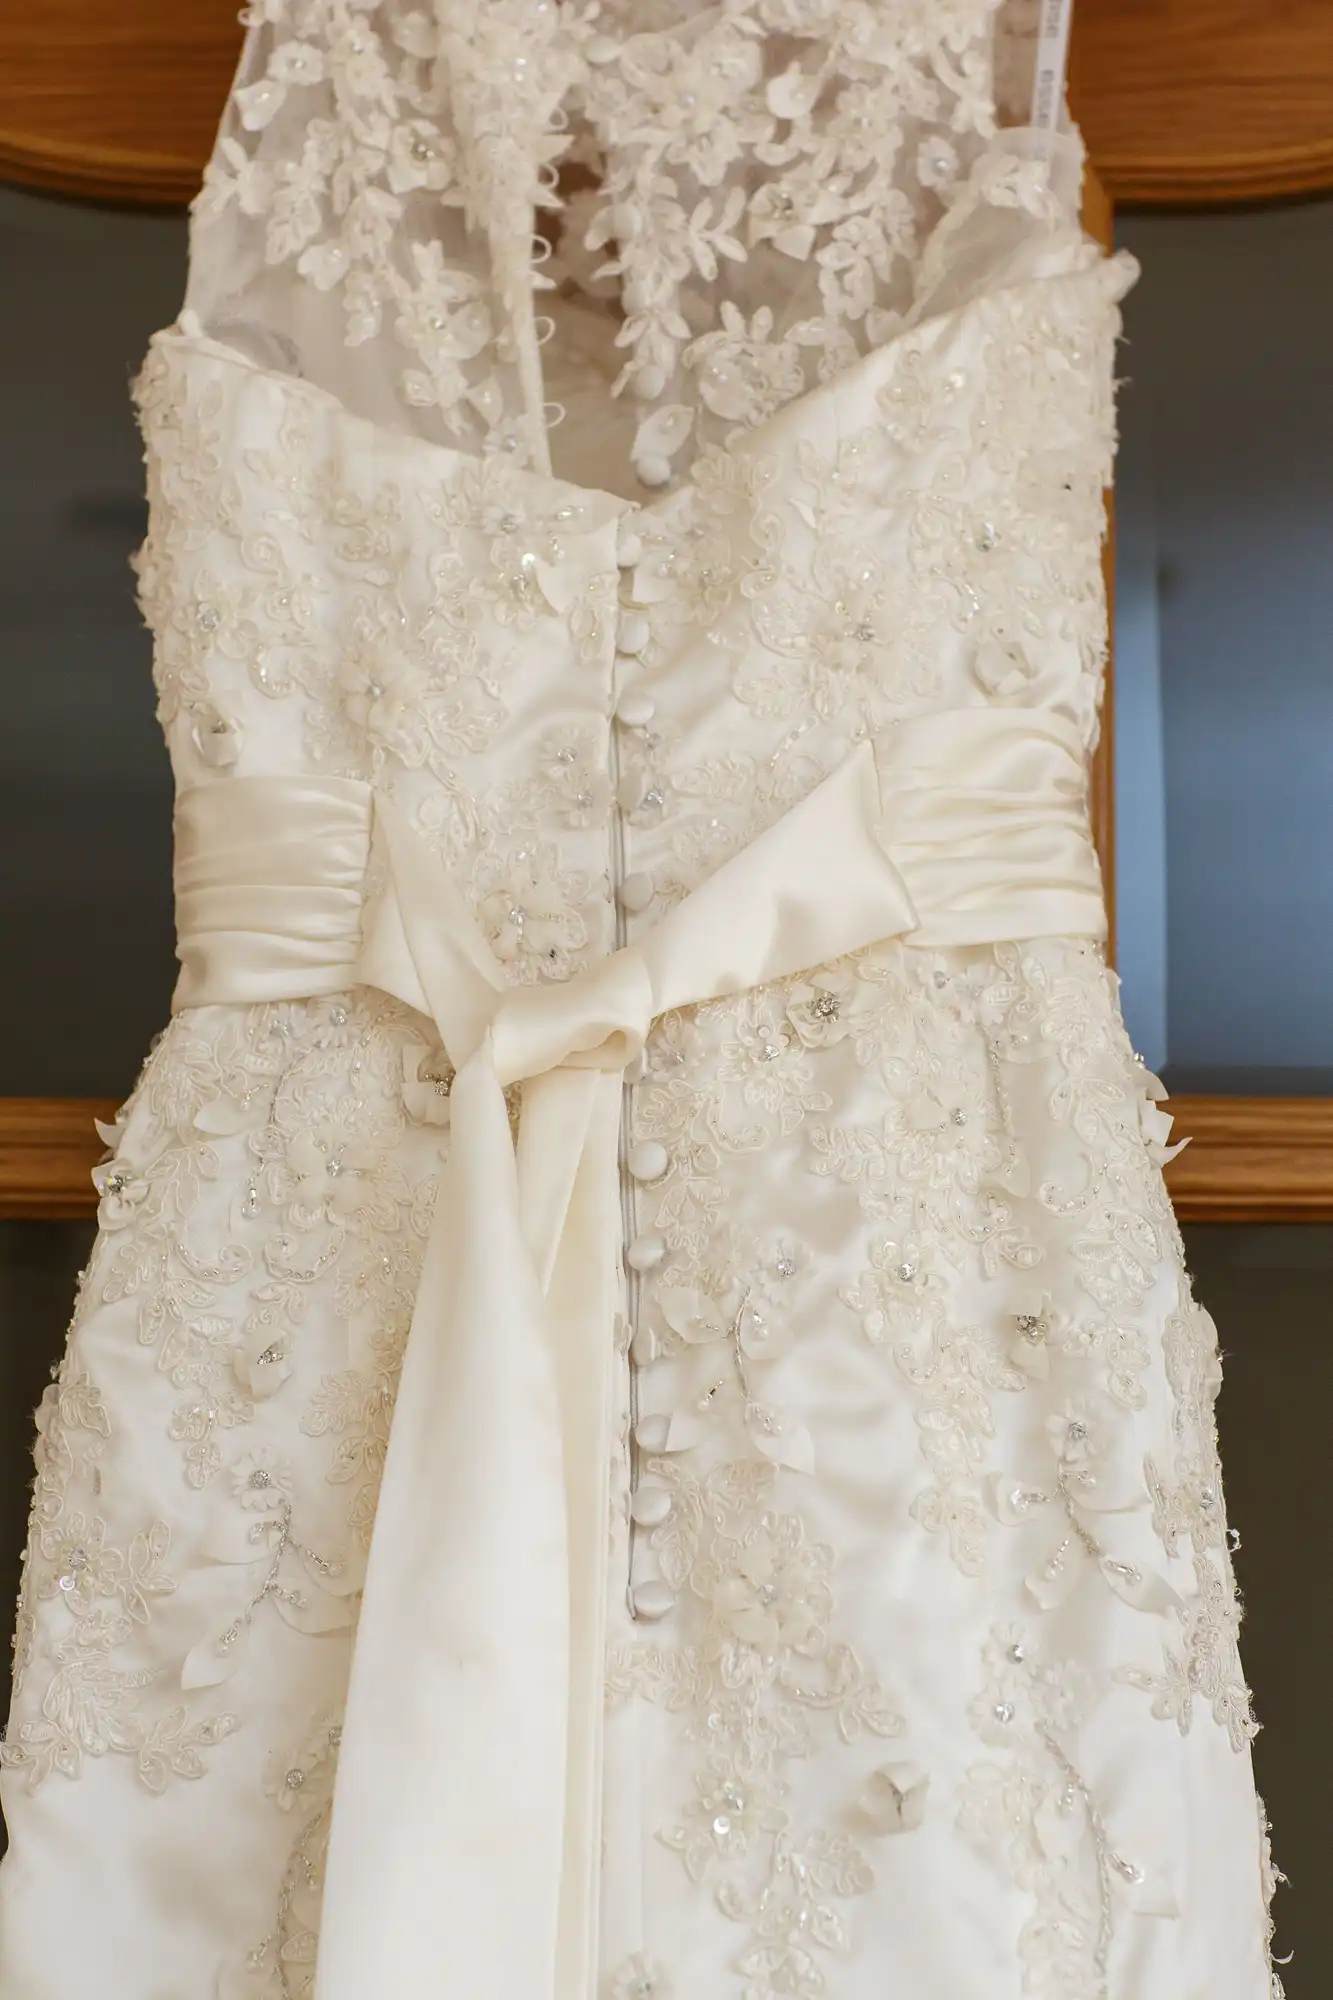 An intricately embroidered wedding dress with a satin bow hanging on a wooden door.